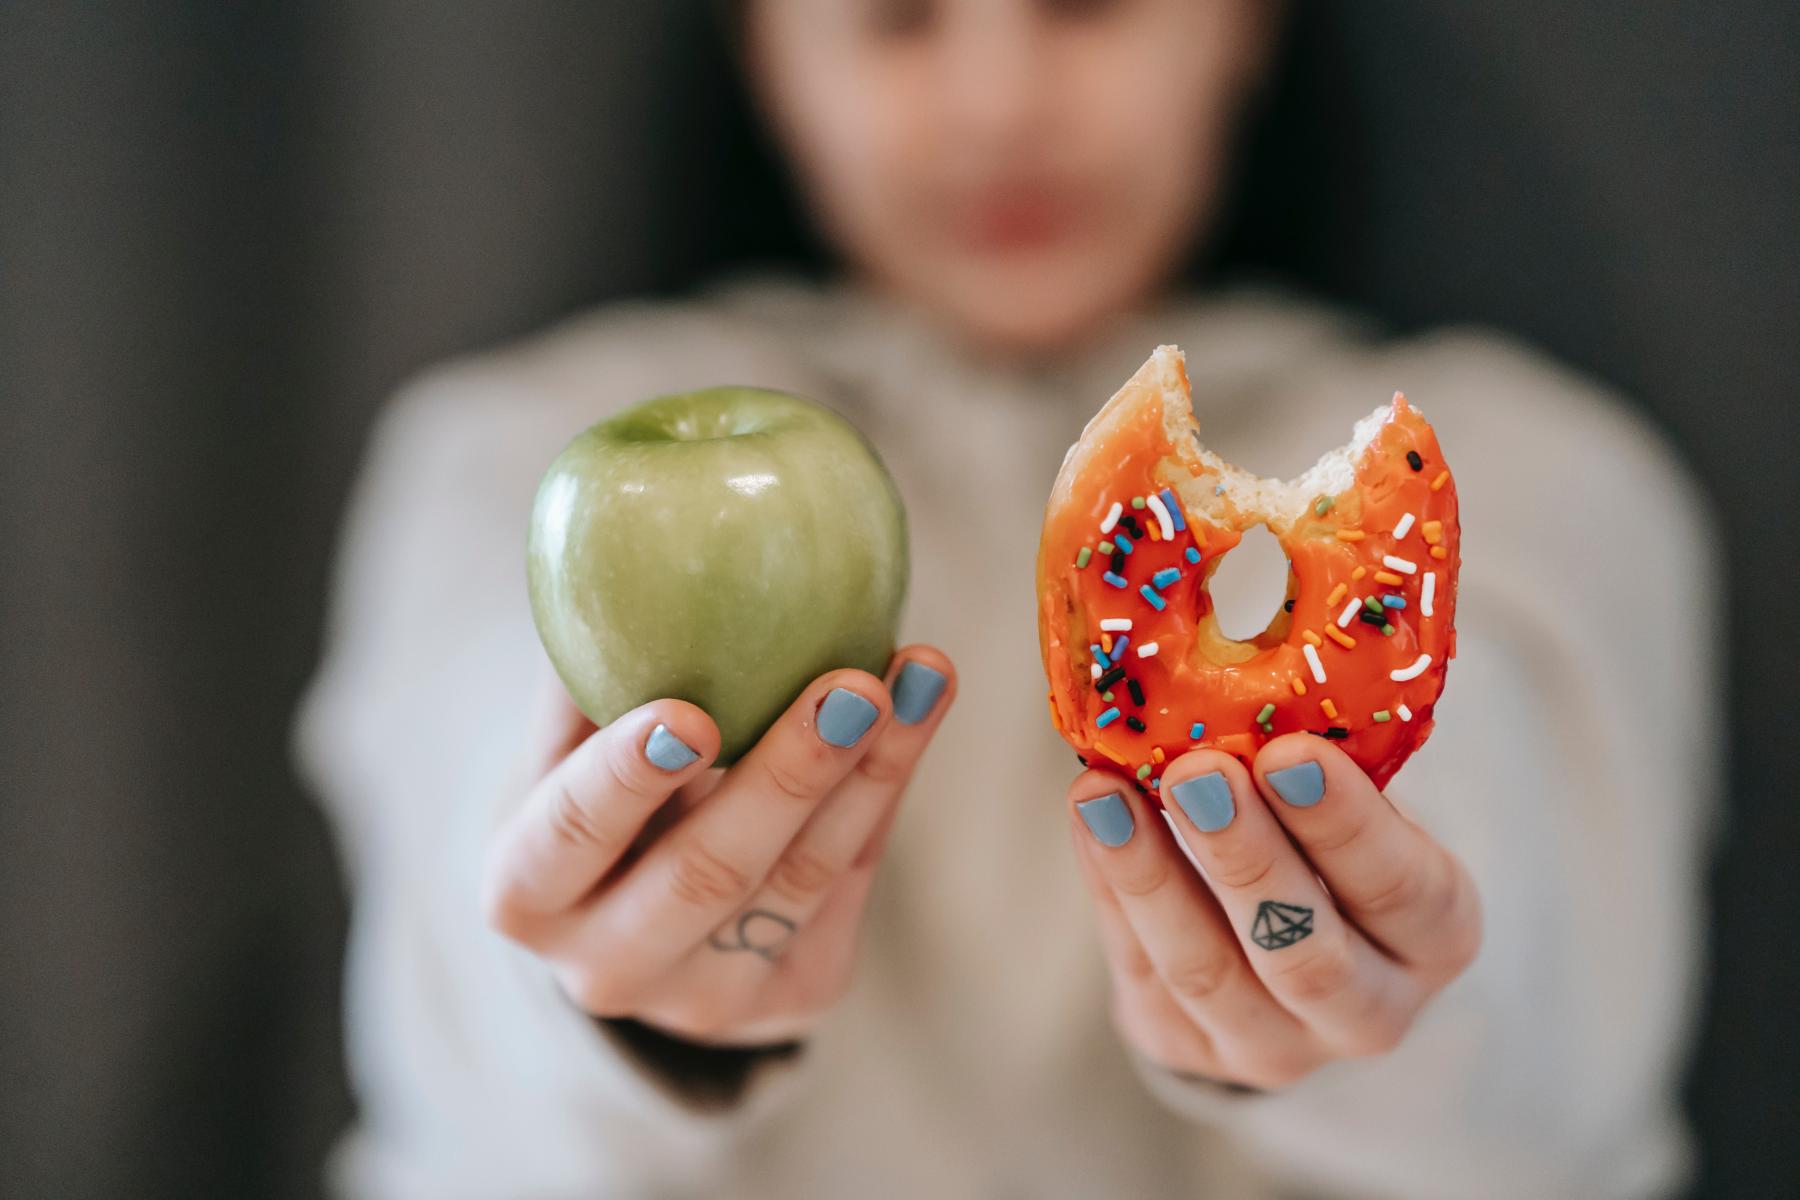 Person holding up an apple and a donut